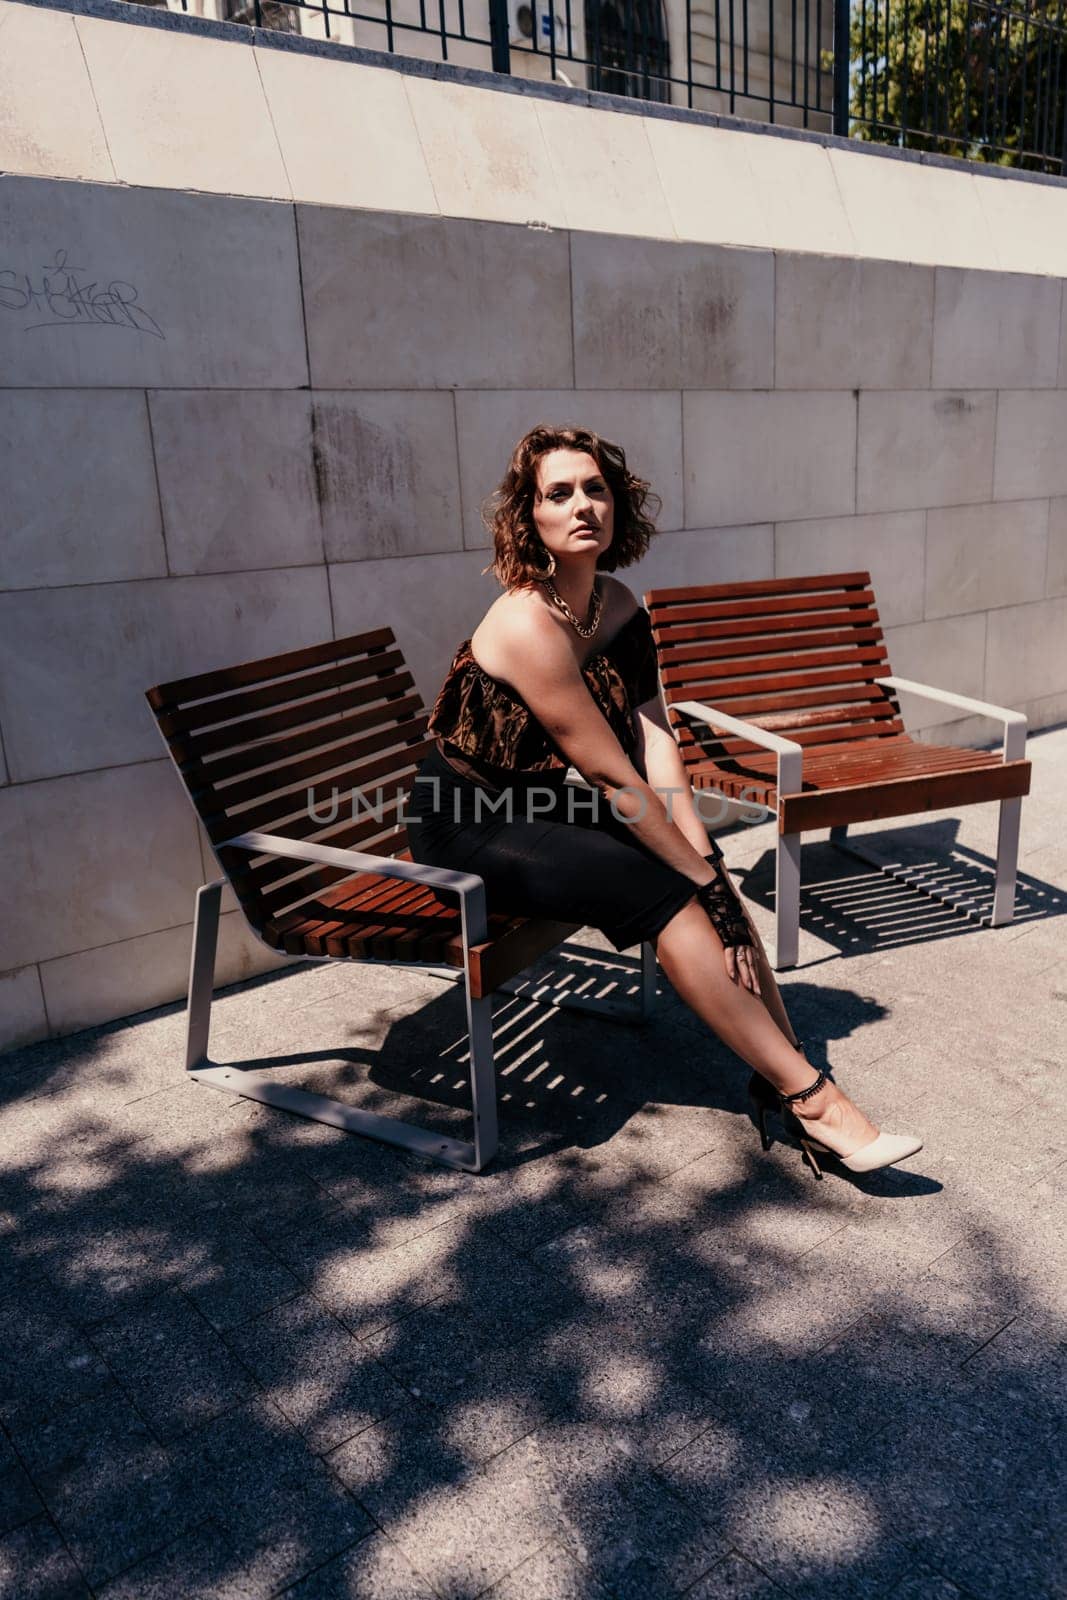 Portrait of a woman on the street. An attractive woman in a black dress is sitting on a bench outside